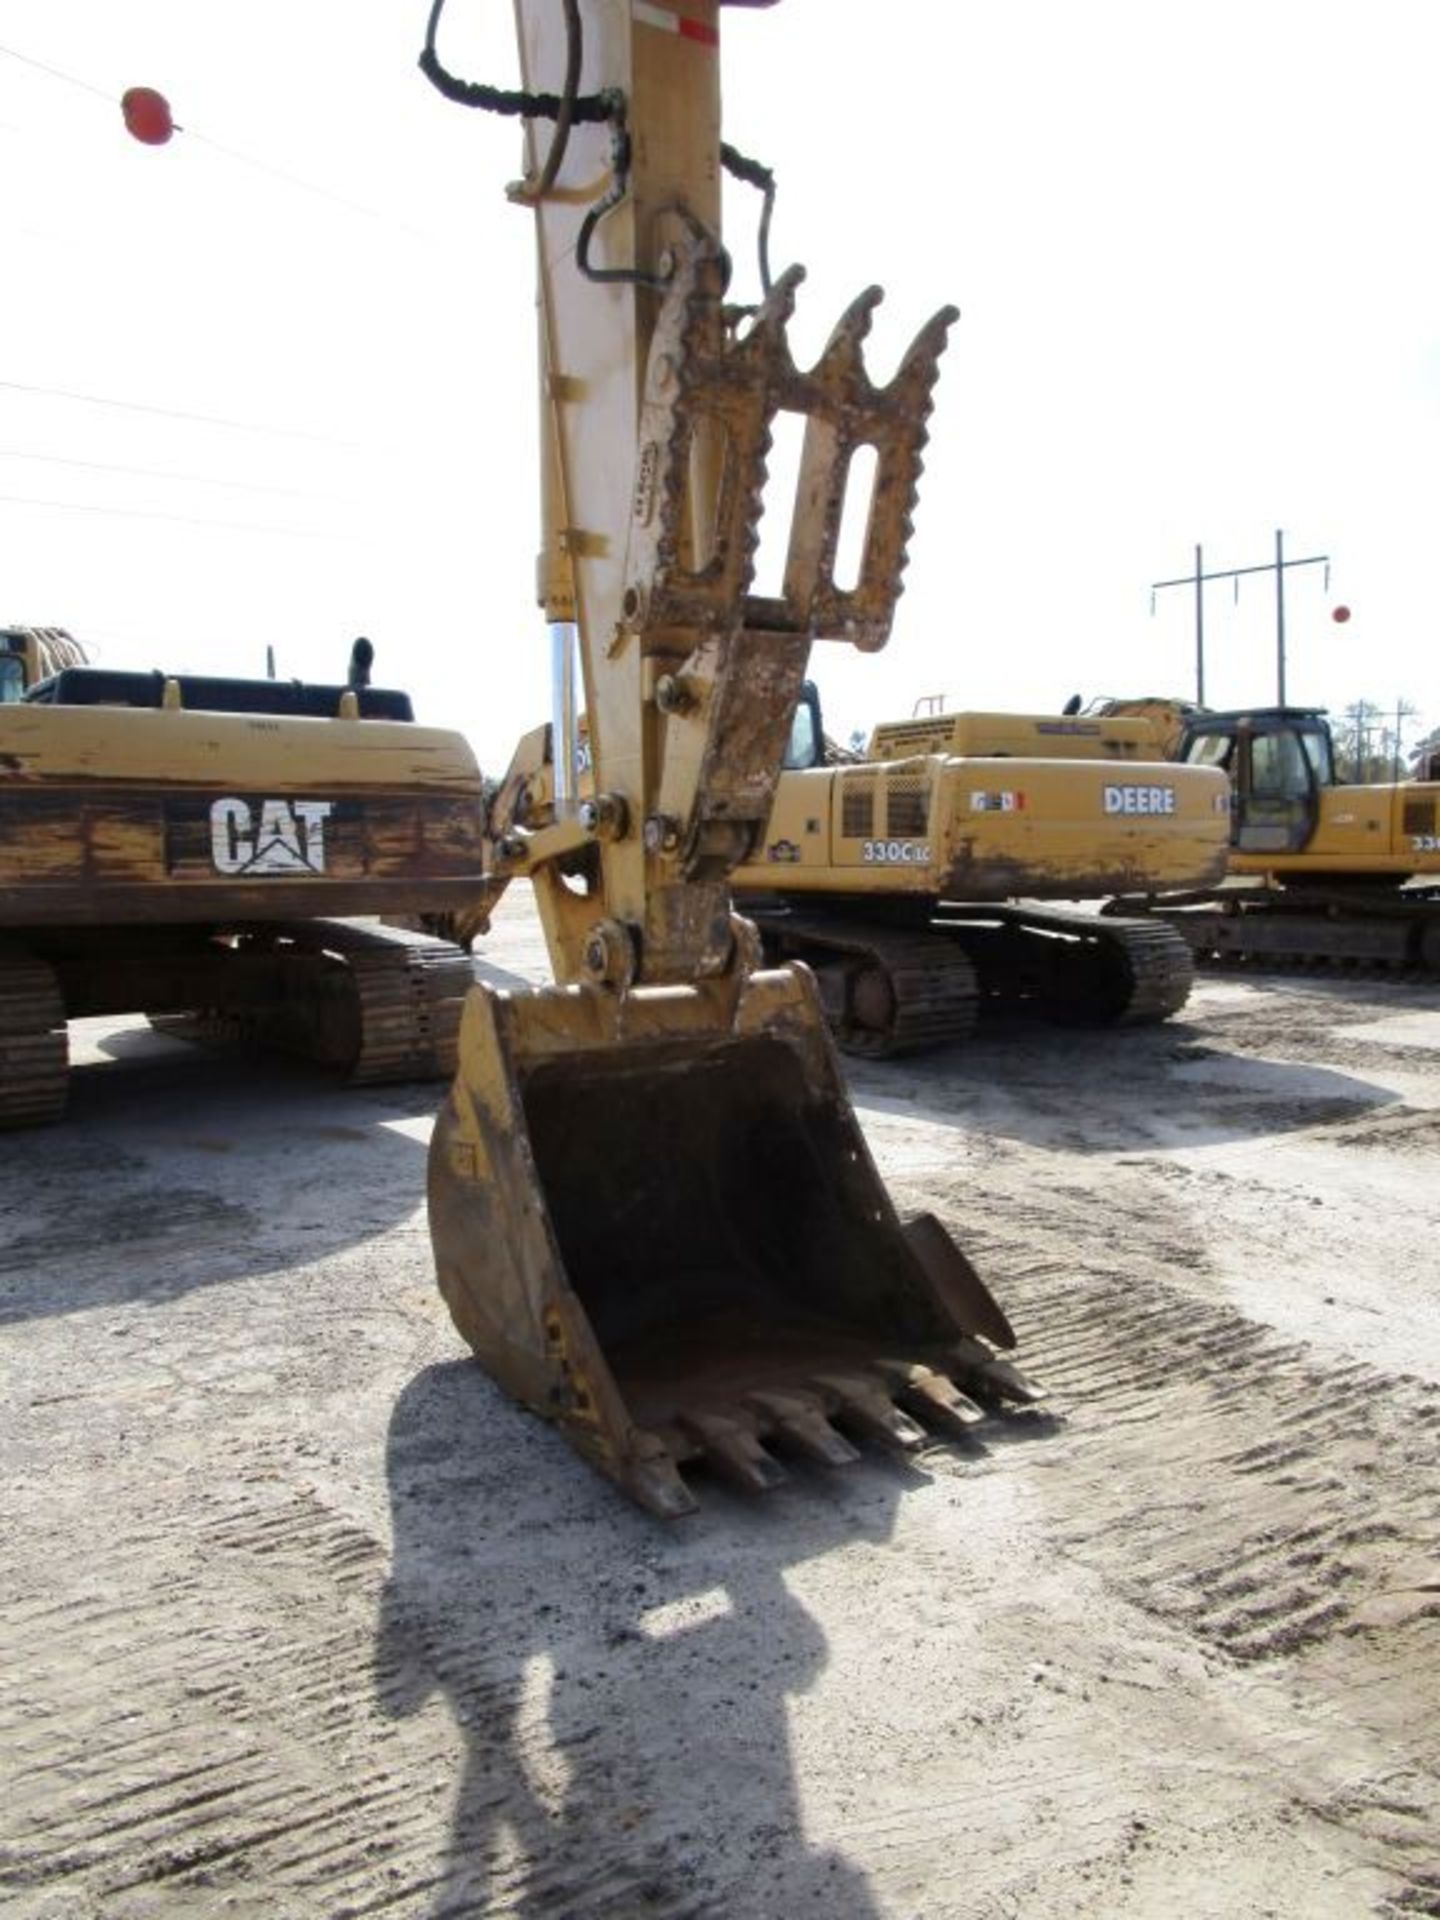 CATERPILLAR 320DL Excavator, sn: PHX00940, 31.5'' Pads, 49'' Digging Bucket, Hydraulic Thumb, HRS: - Image 13 of 14